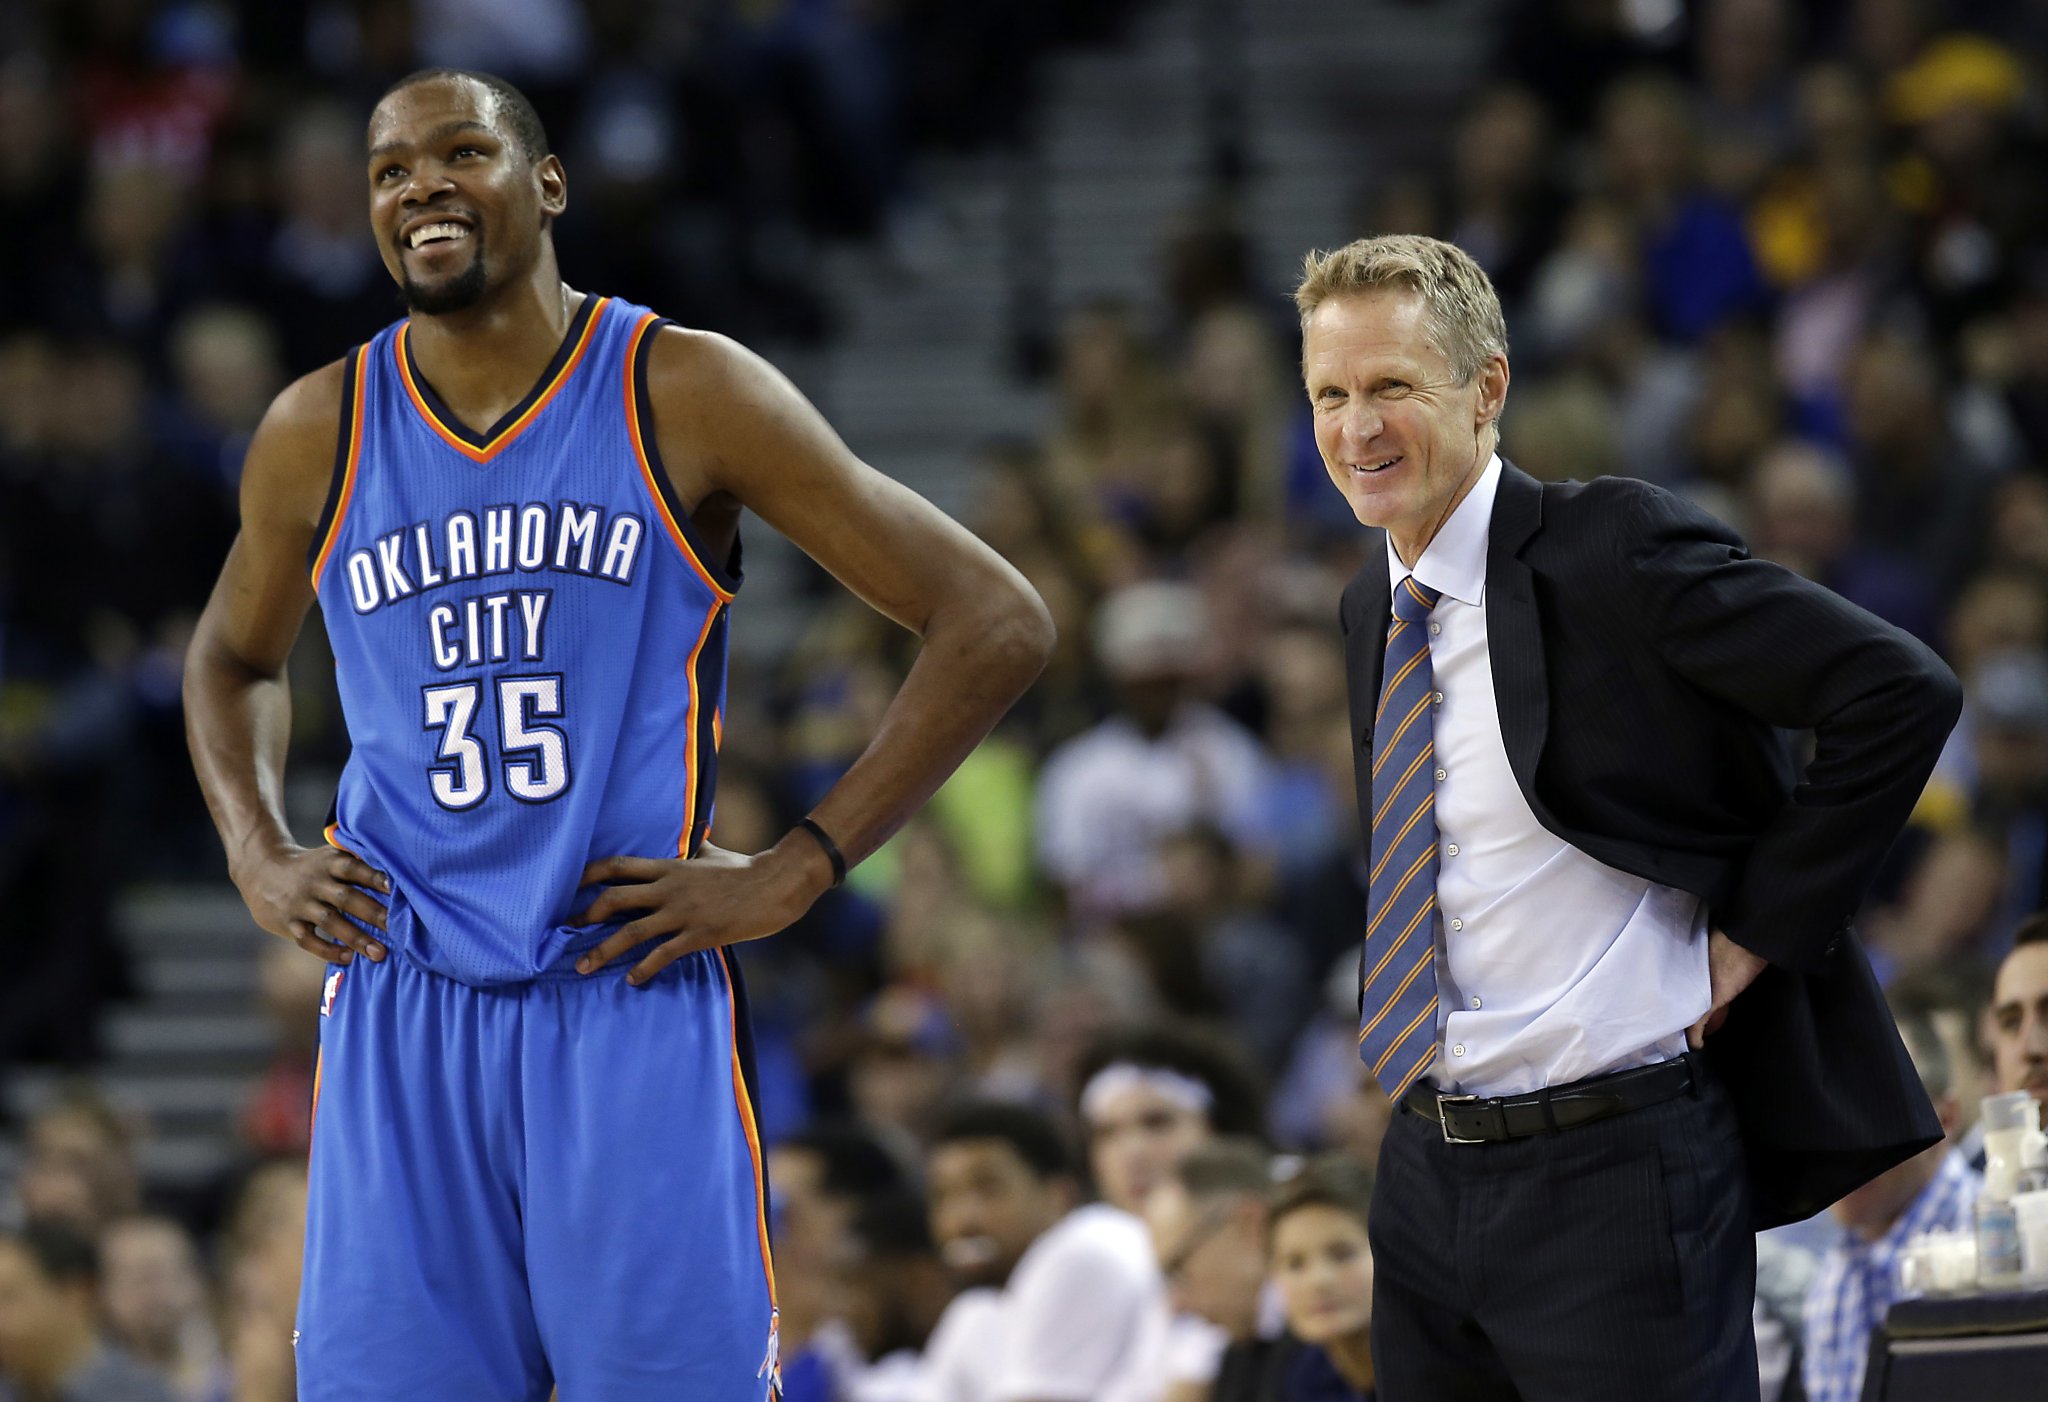 The obituary of Kevin Durant and the Oklahoma City Thunder, by Ben Mallis